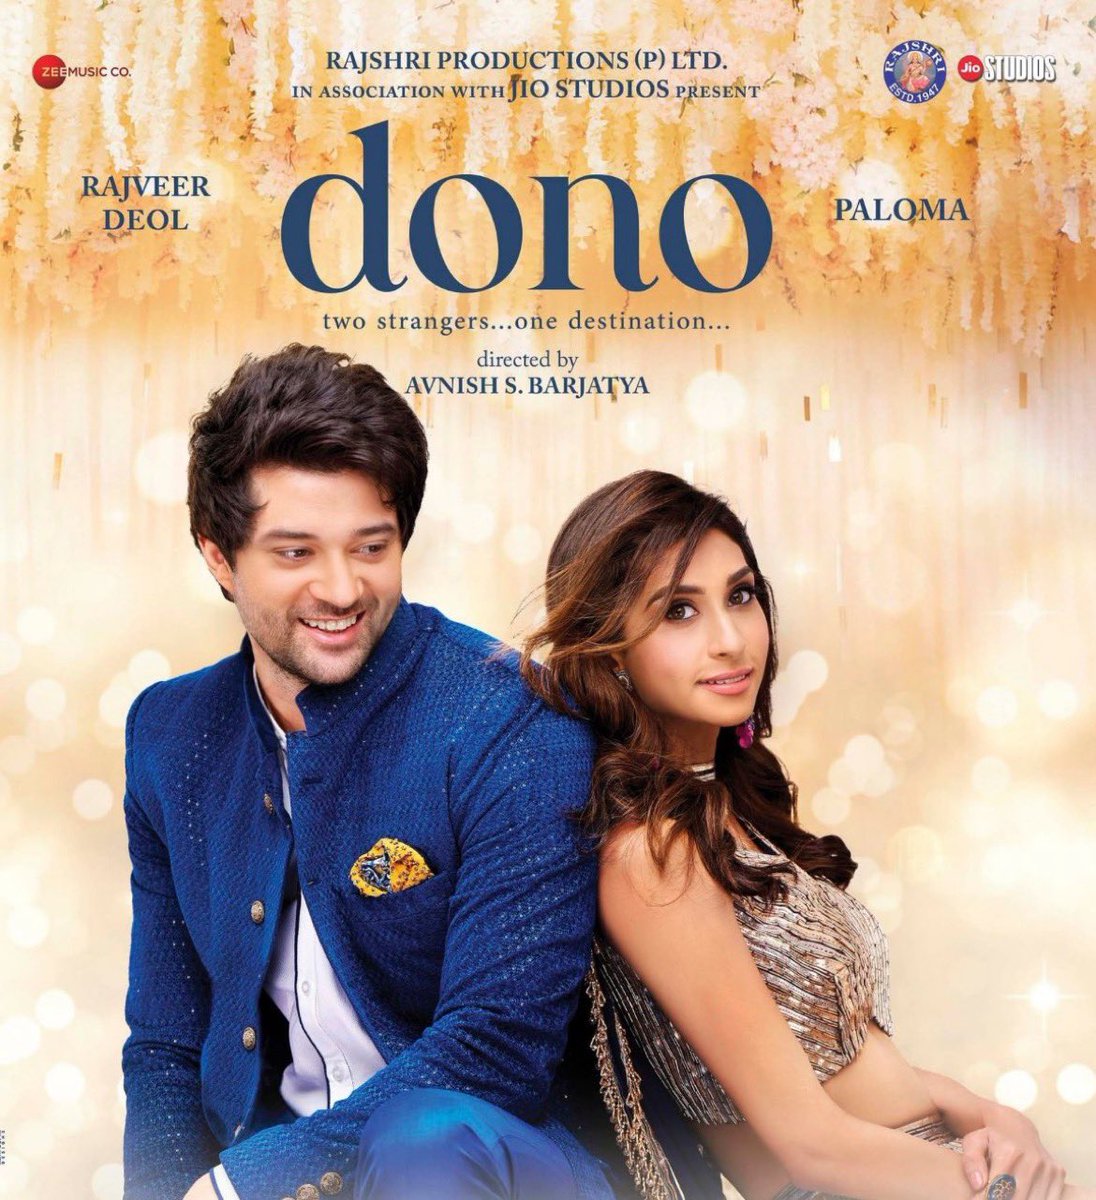 Watched #Dono last night and I have to say it’s the most relatable piece of cinema out there! It’s made with so much love & honesty by #AvnishBarjatya. #RajveerDeol and #Paloma have done such a stellar job on their big debut! So proud of both of them. Go watch it guys ❤️🫶🏻